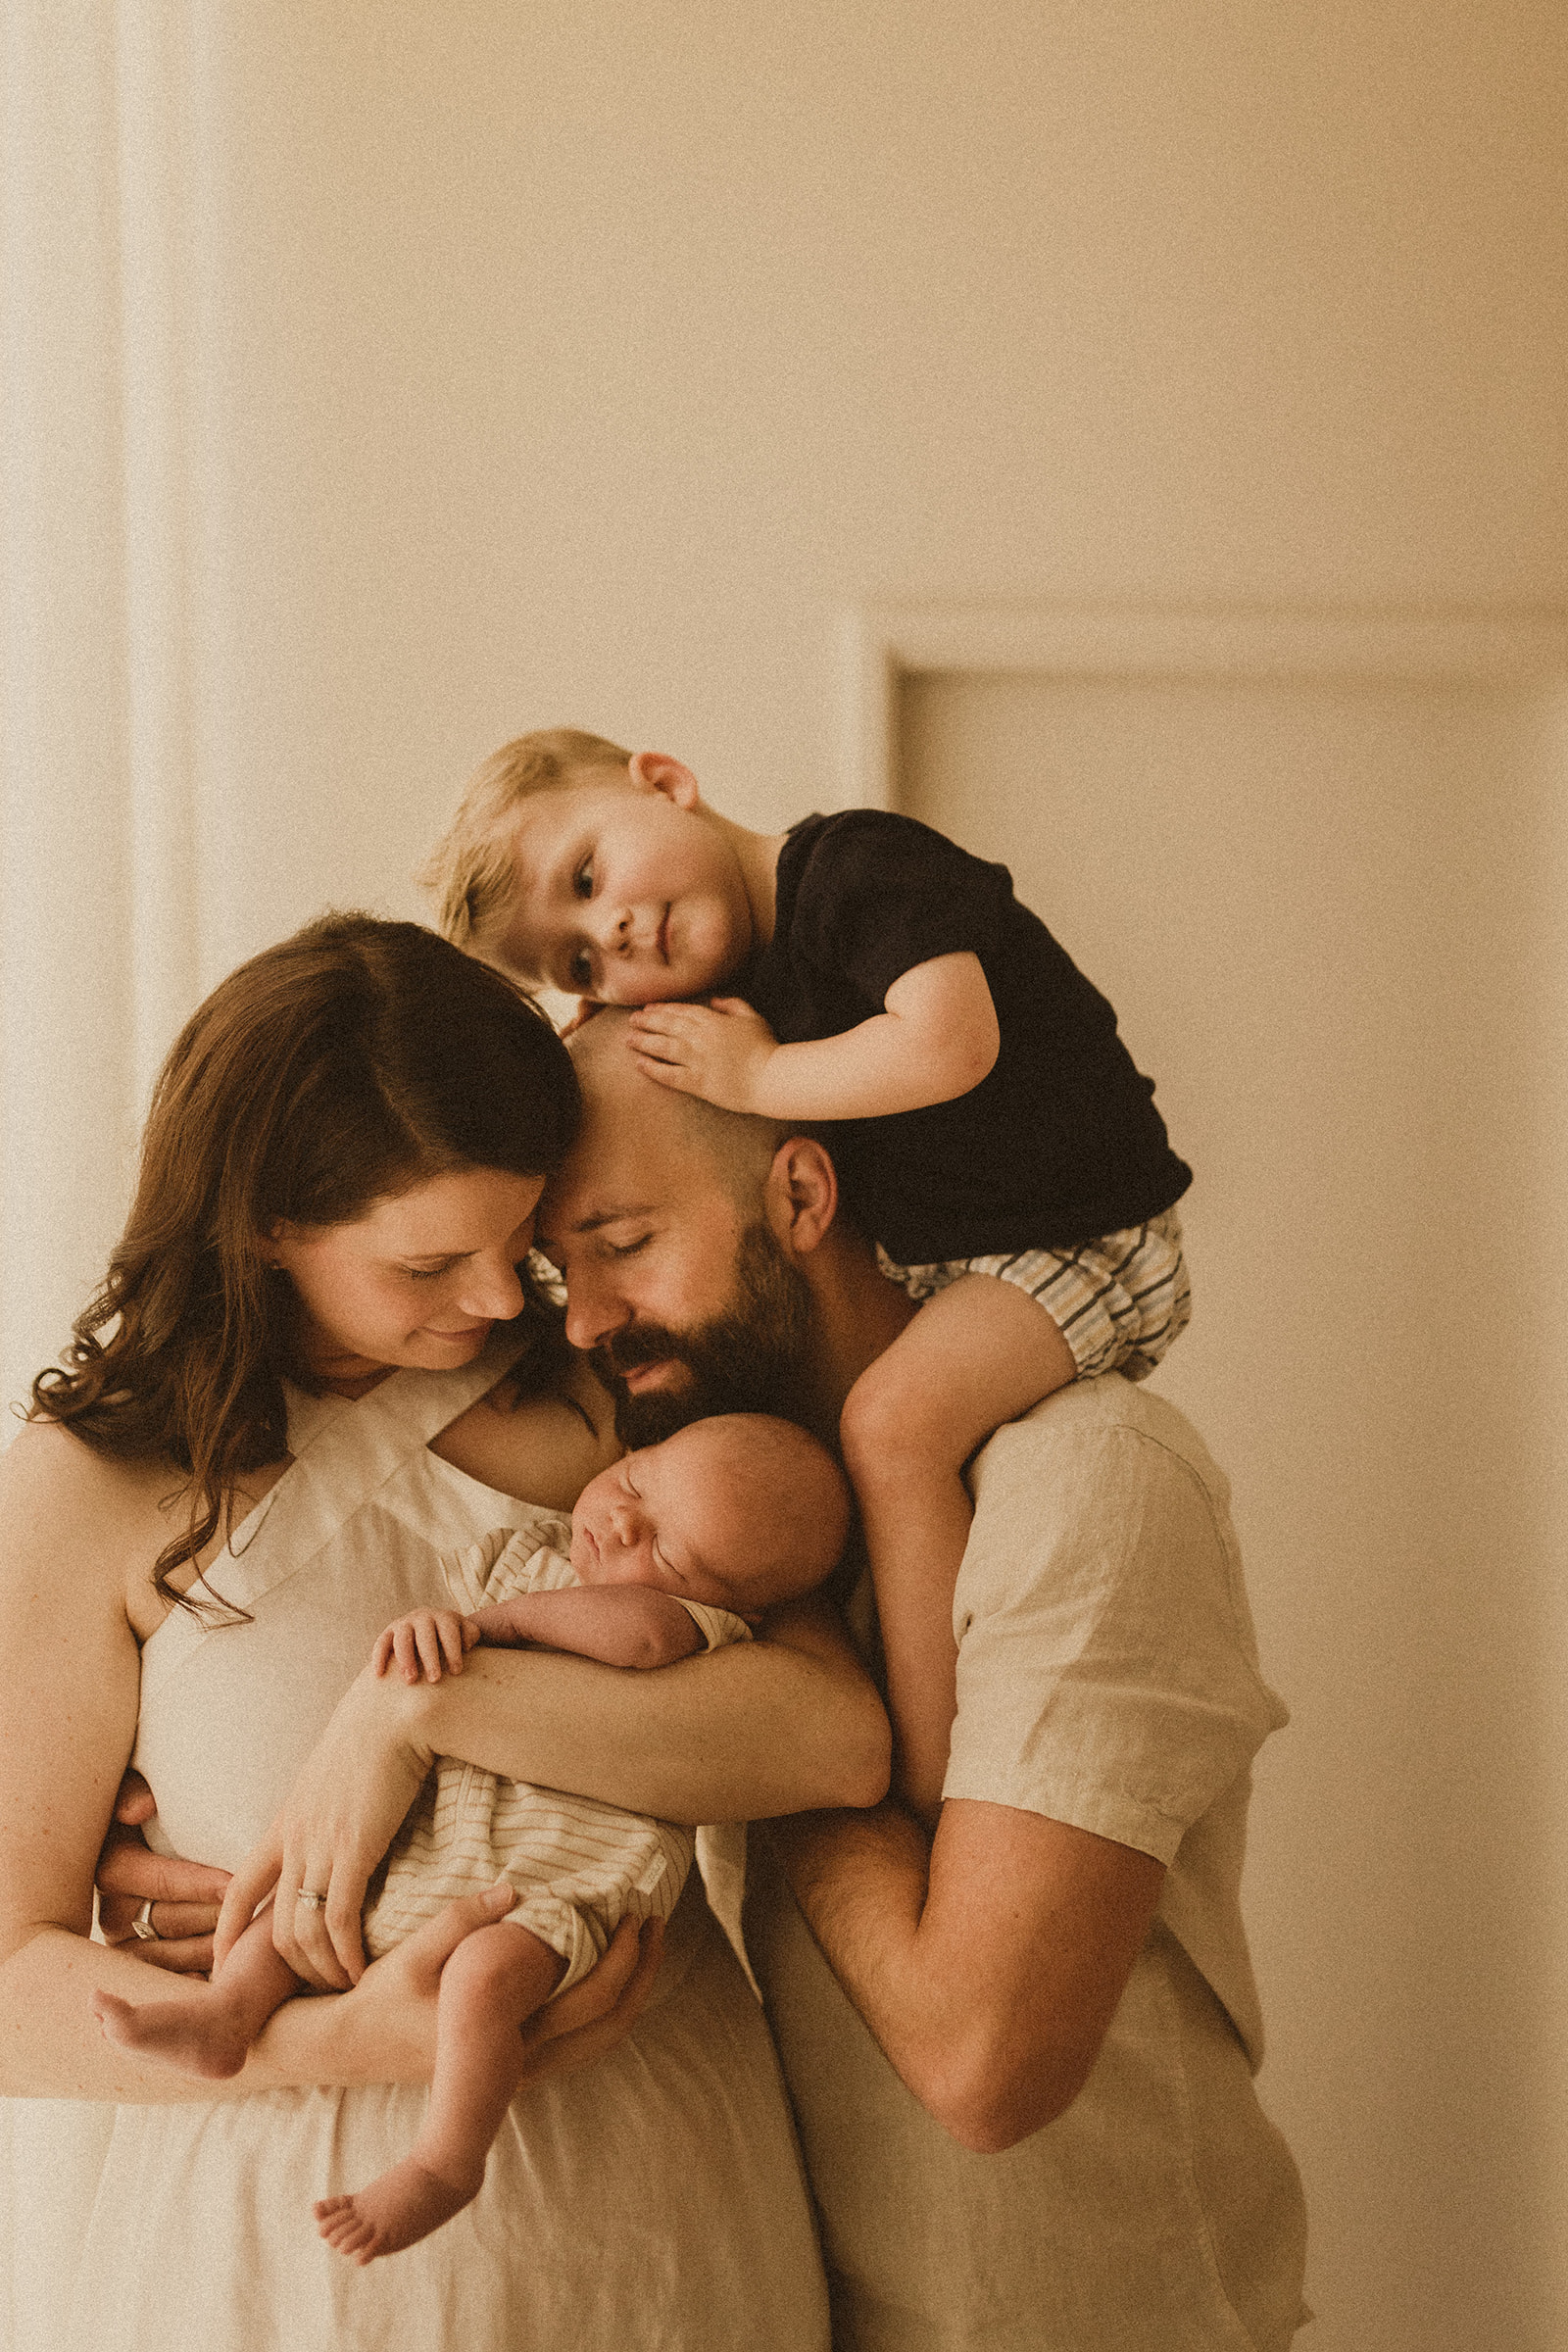 Newborn family photography Sydney. Family cuddle newborn, toddler on dads shoulders